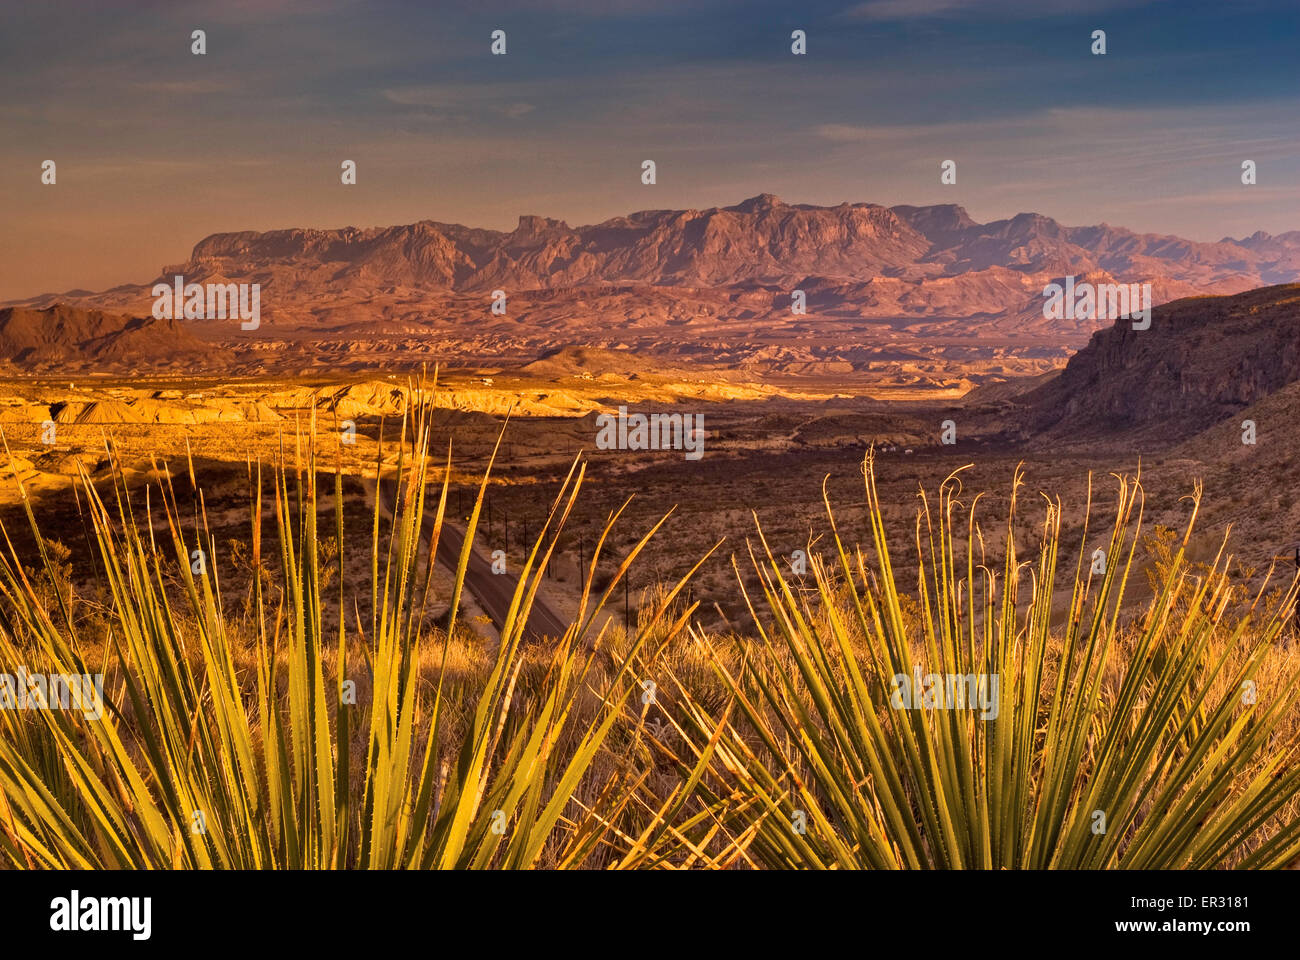 Chisos Mountains at 20 miles E, sunset, sotol plants in foreground in Chihuahuan Desert, Big Bend National Park, Texas, USA Stock Photo